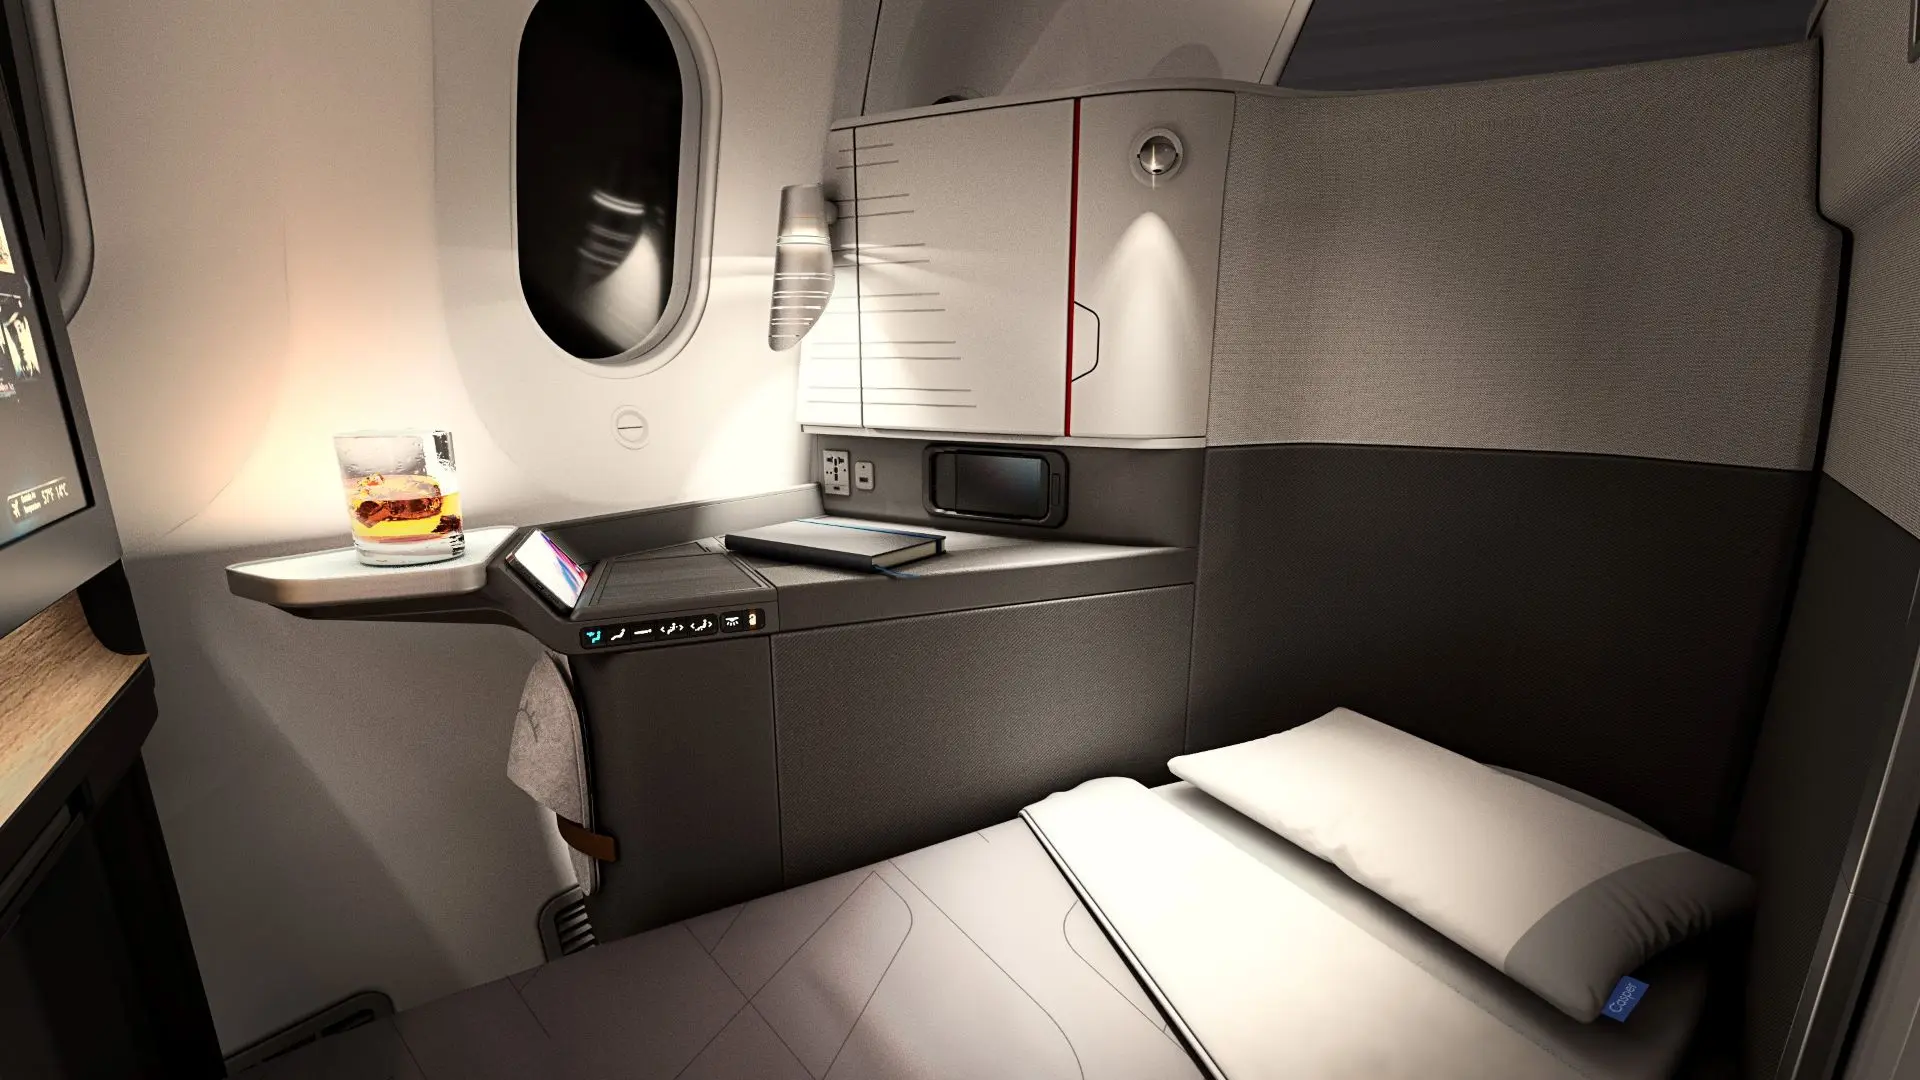 Airlines News - American Airlines unveils its Flagship Suite – spelling the end of First Class